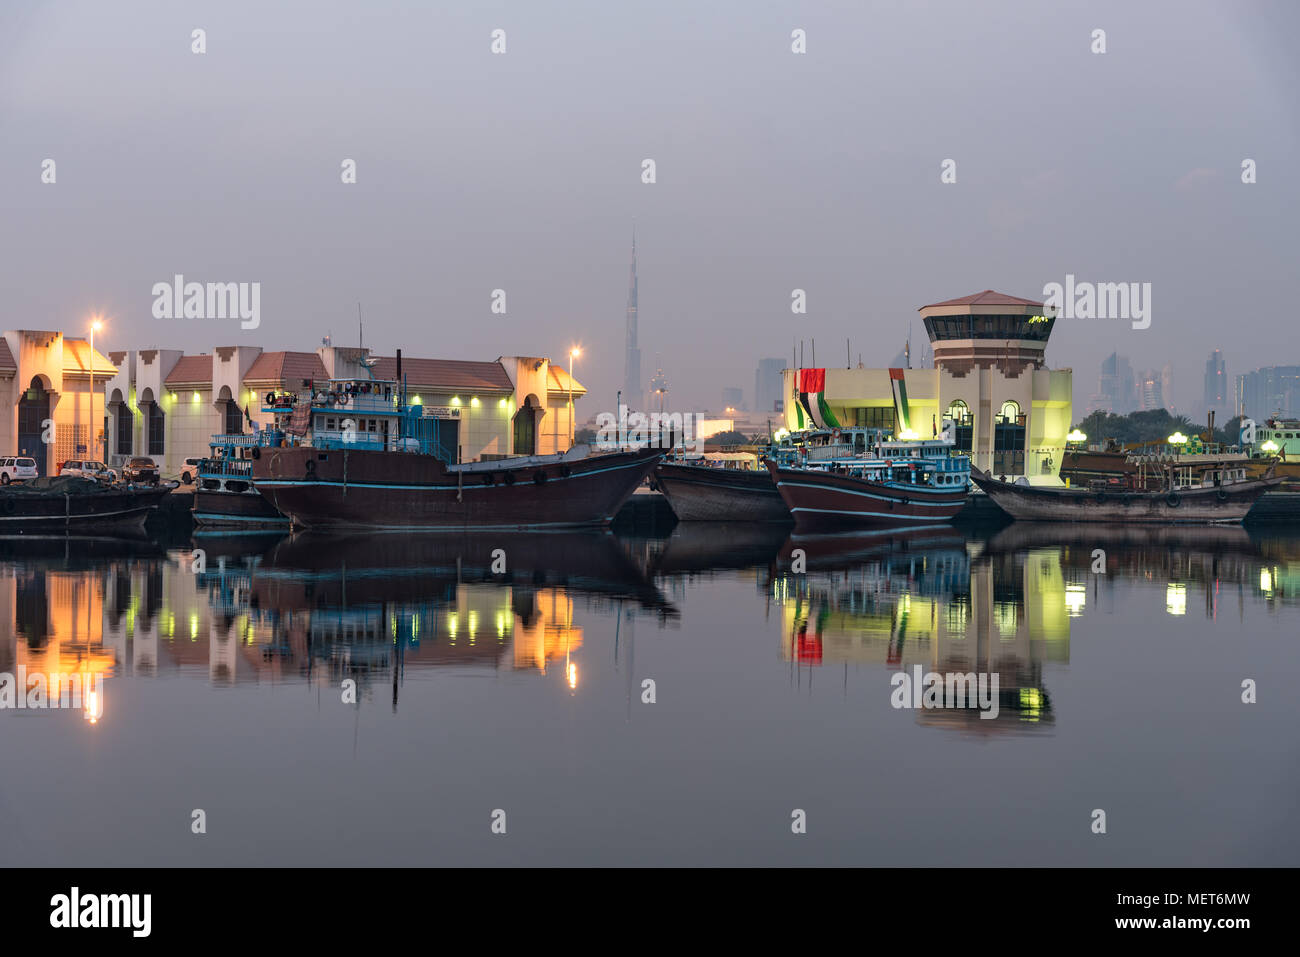 Small ships and dhows line the side of the creek in Dubai. Stock Photo